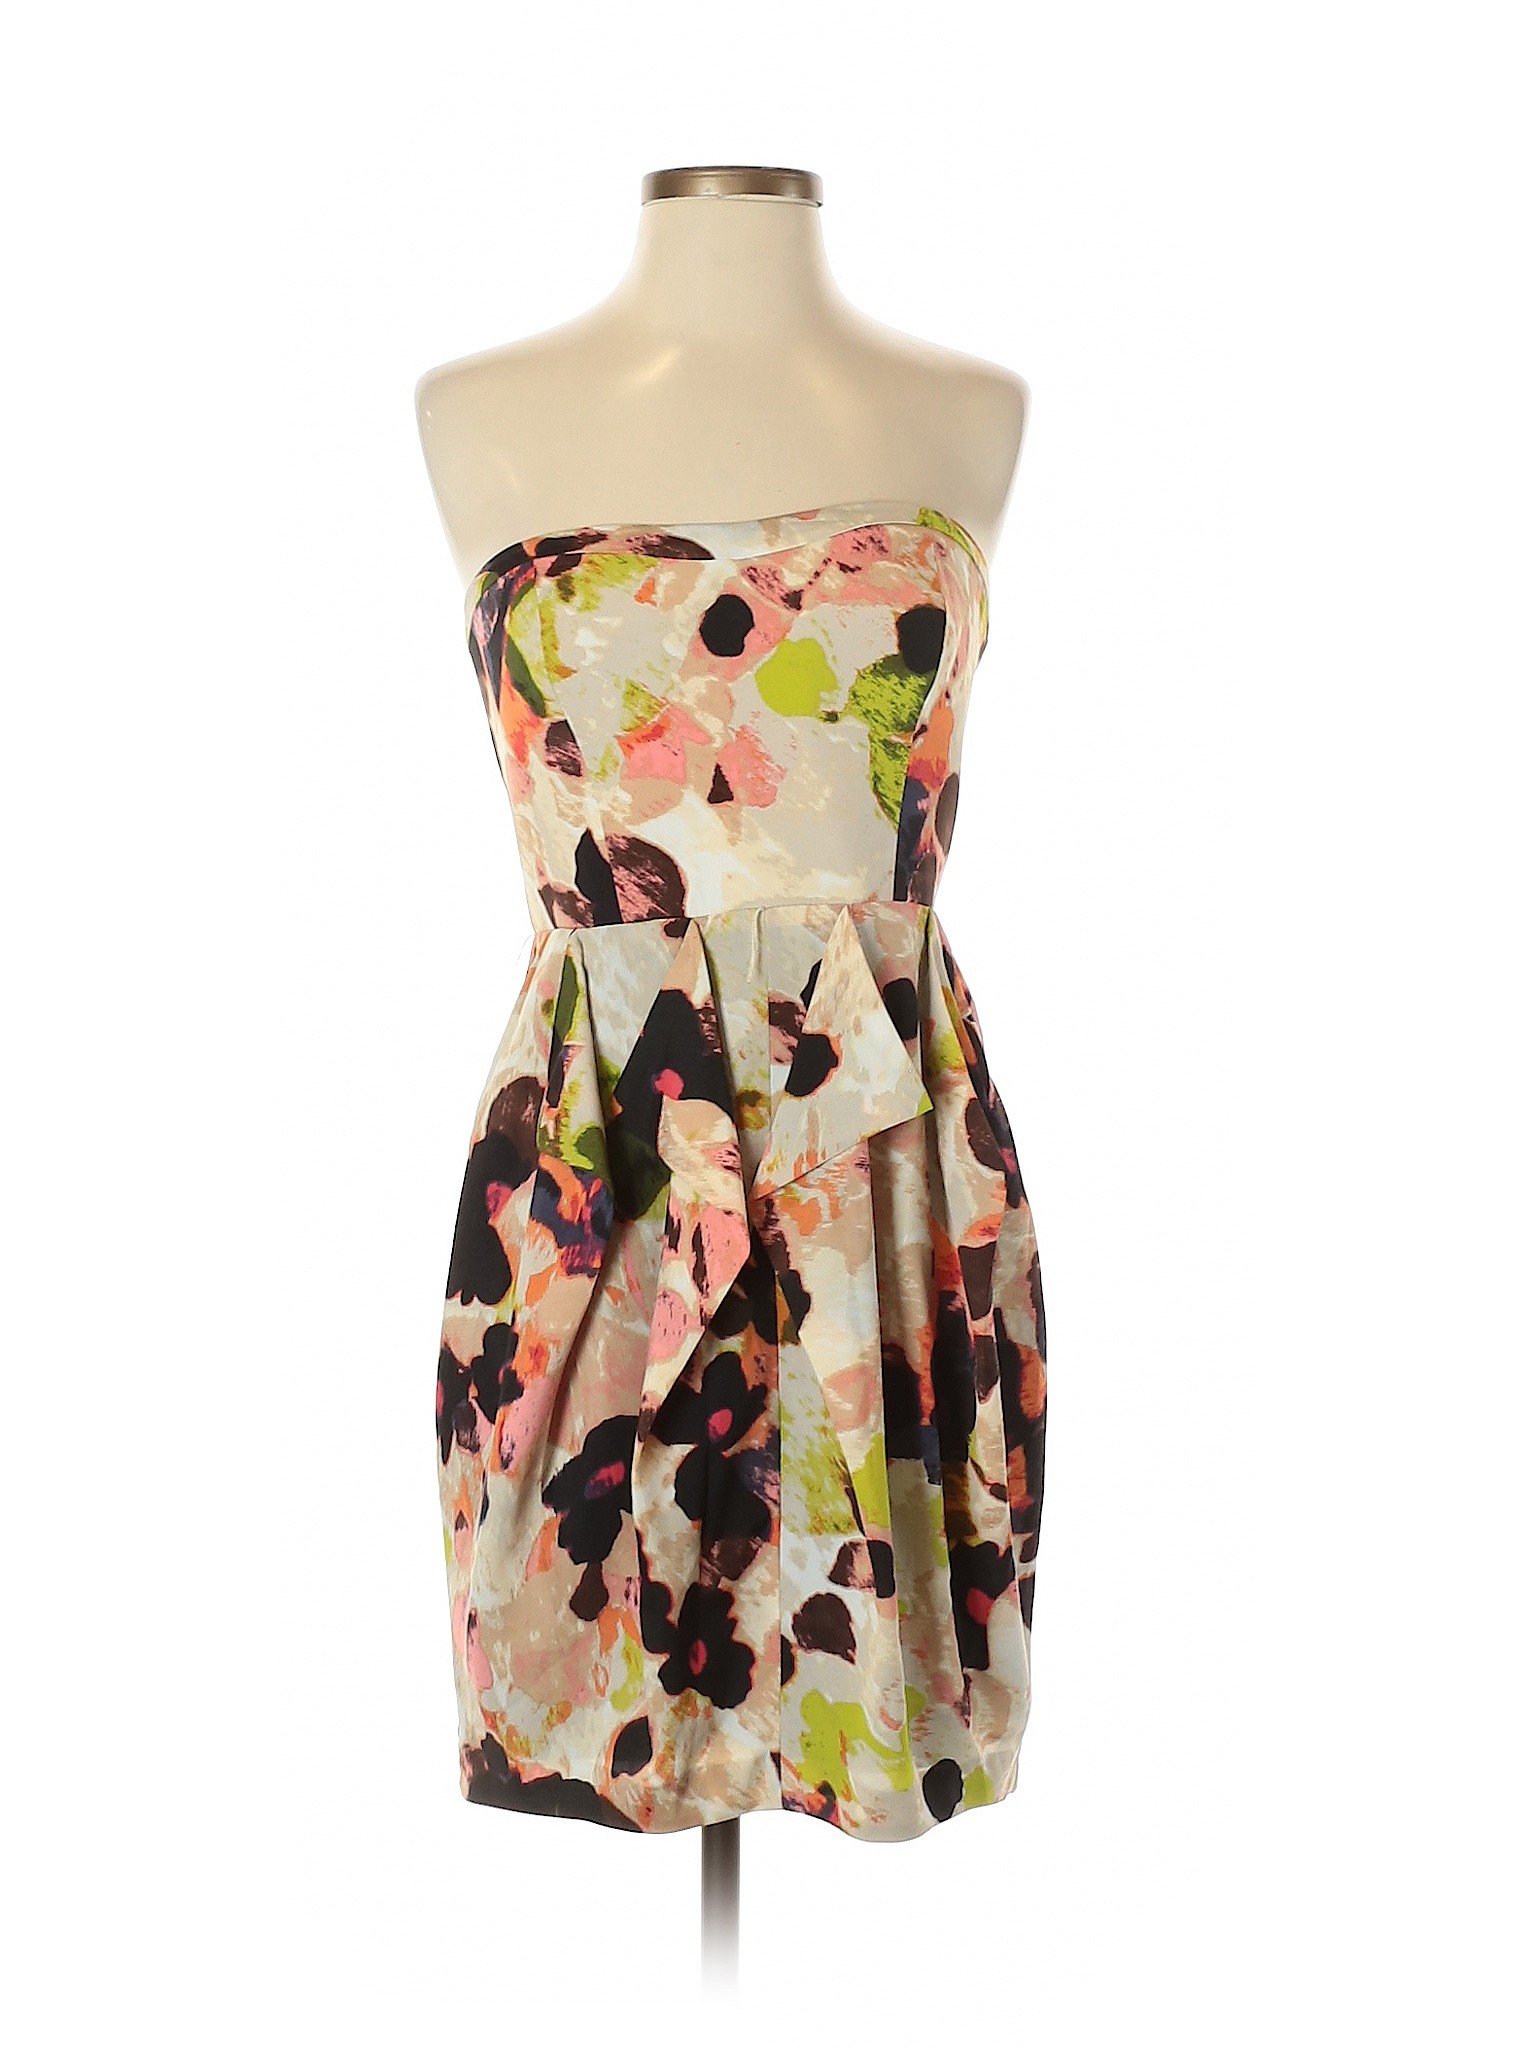 Jessica Simpson 100% Polyester Floral Tan Cocktail Dress Size 4 - 94% ...